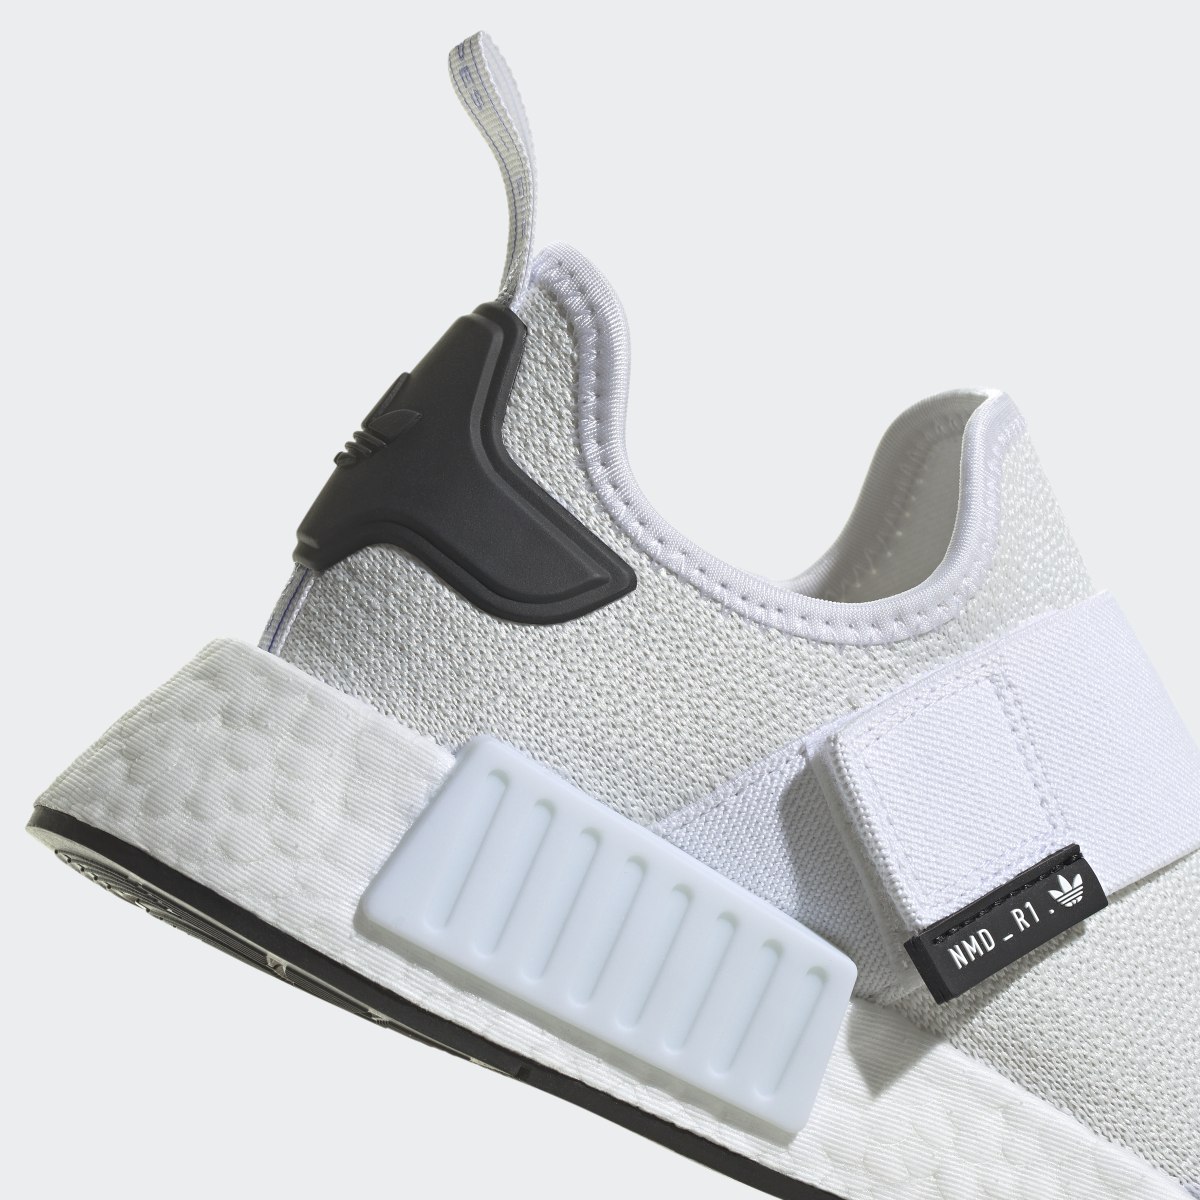 Adidas NMD_R1 Strap Shoes. 10